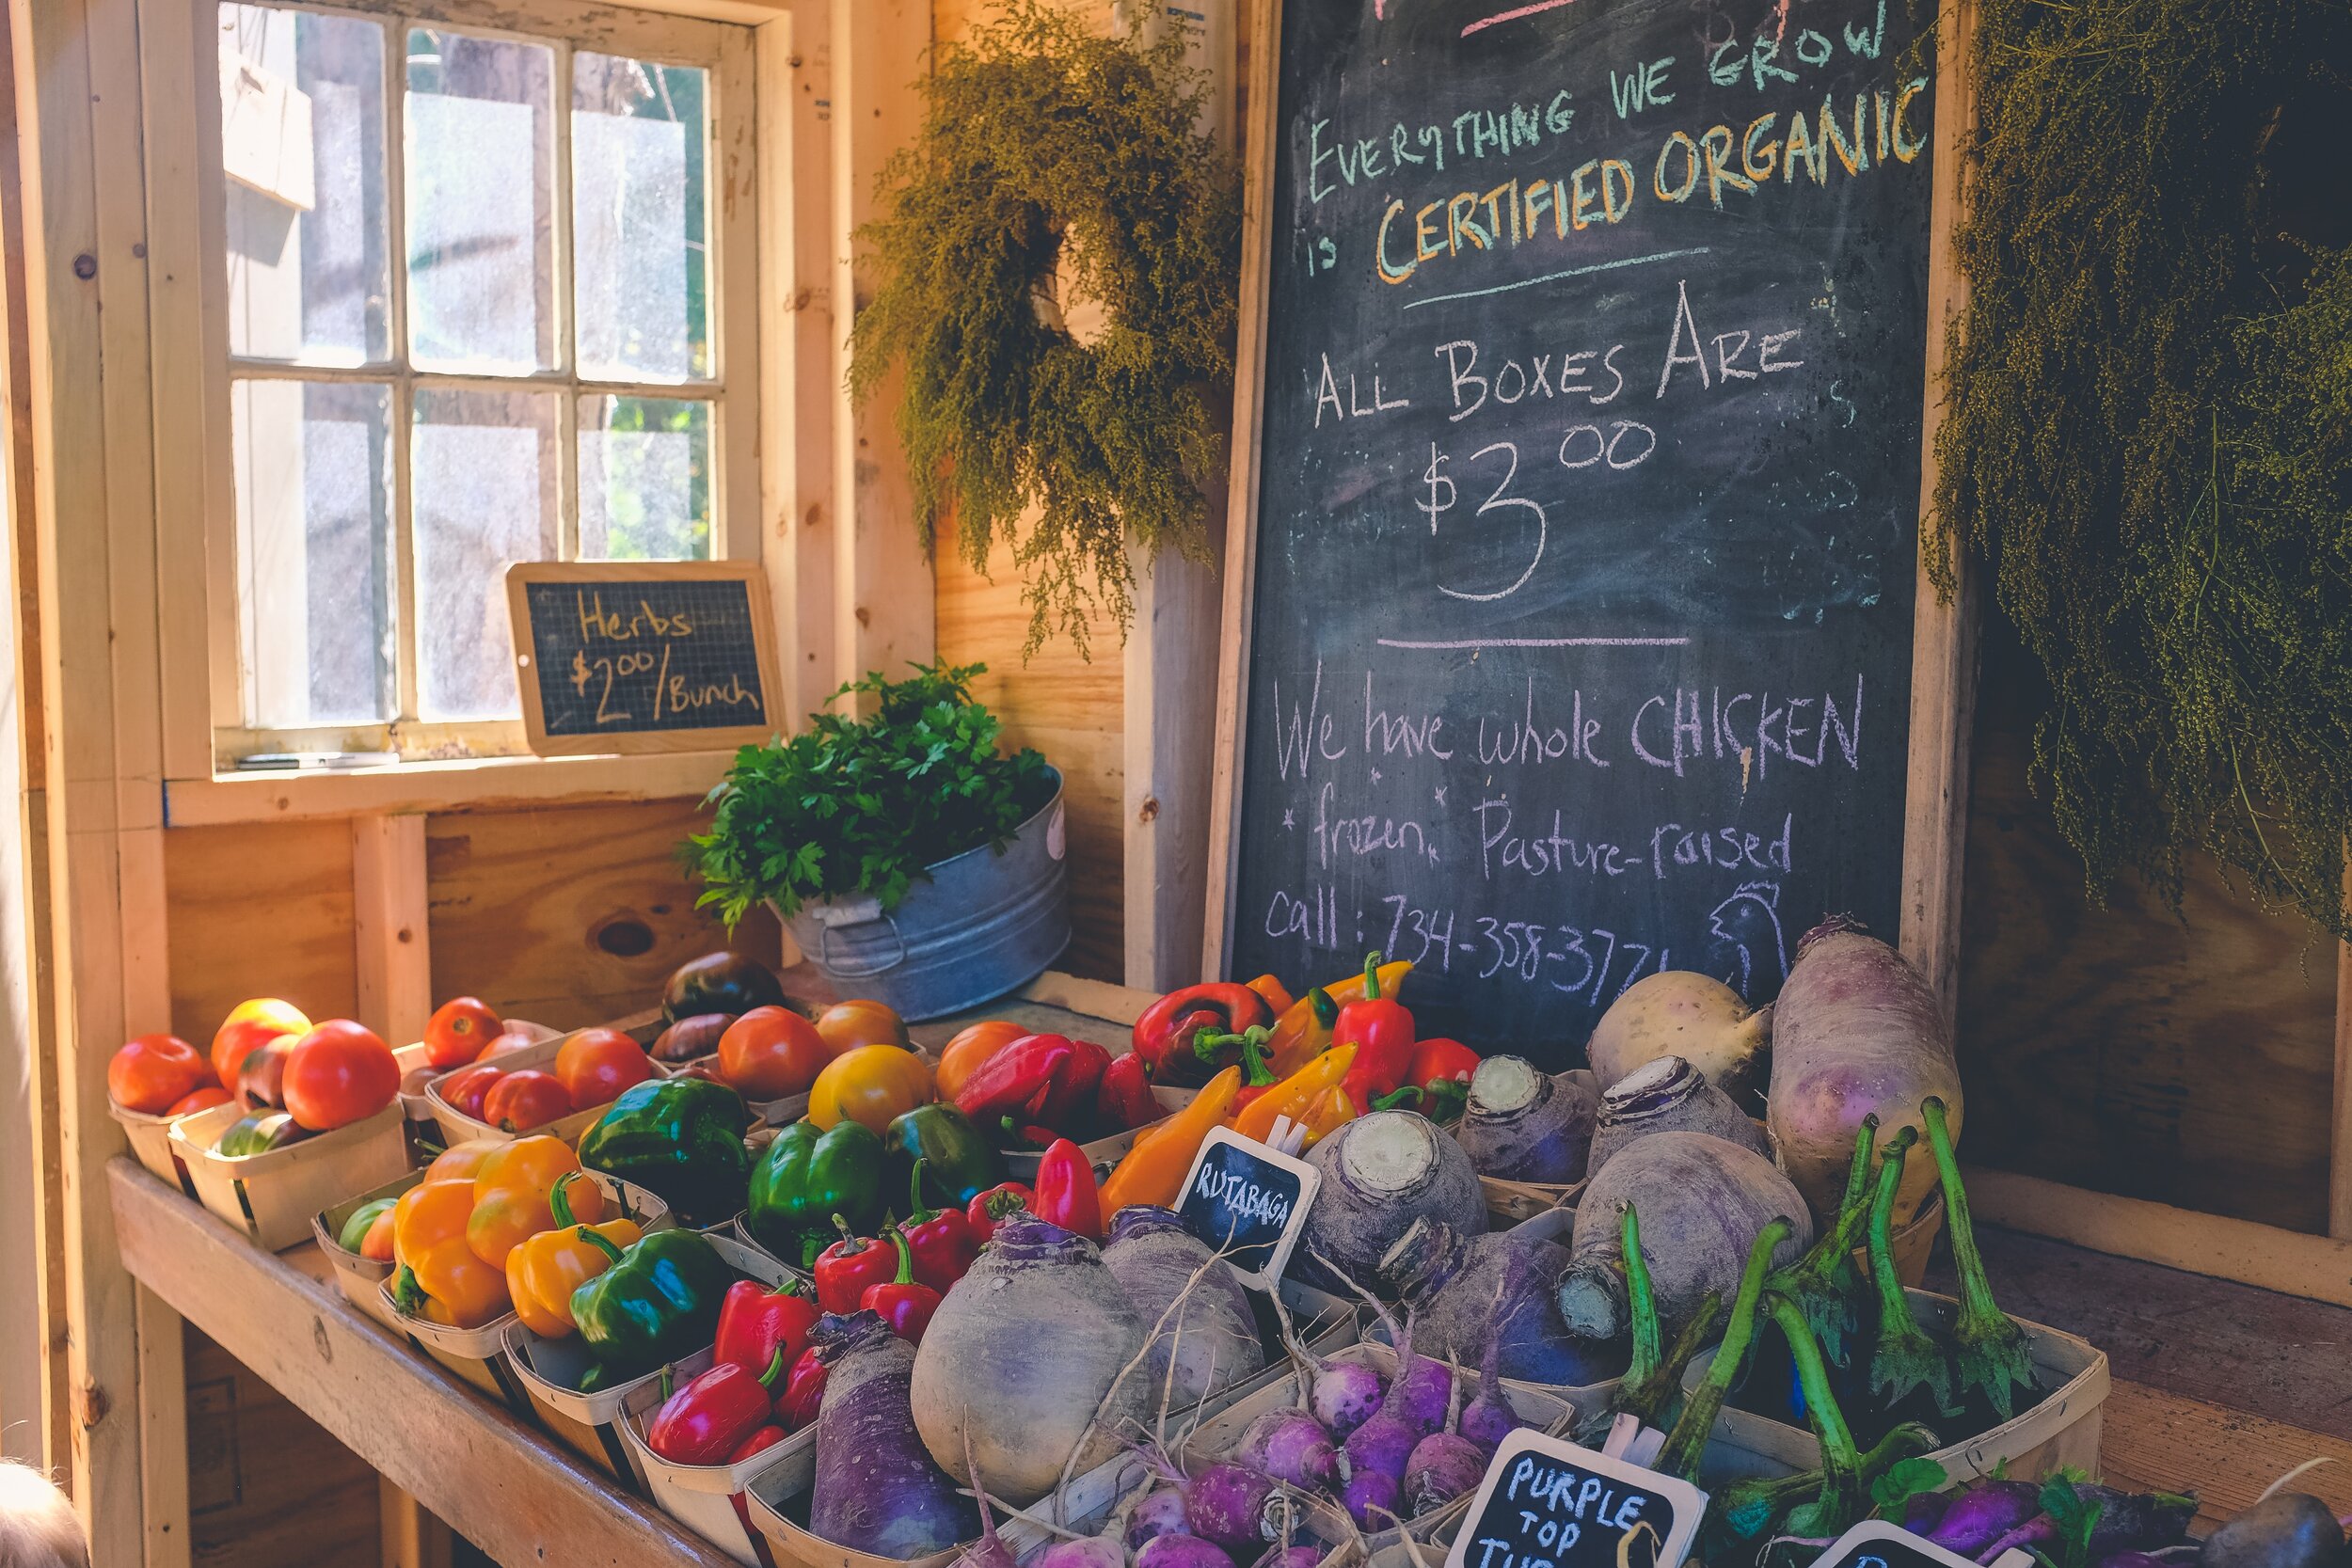 Are Organic Foods Healthier? | Wholesome LLC